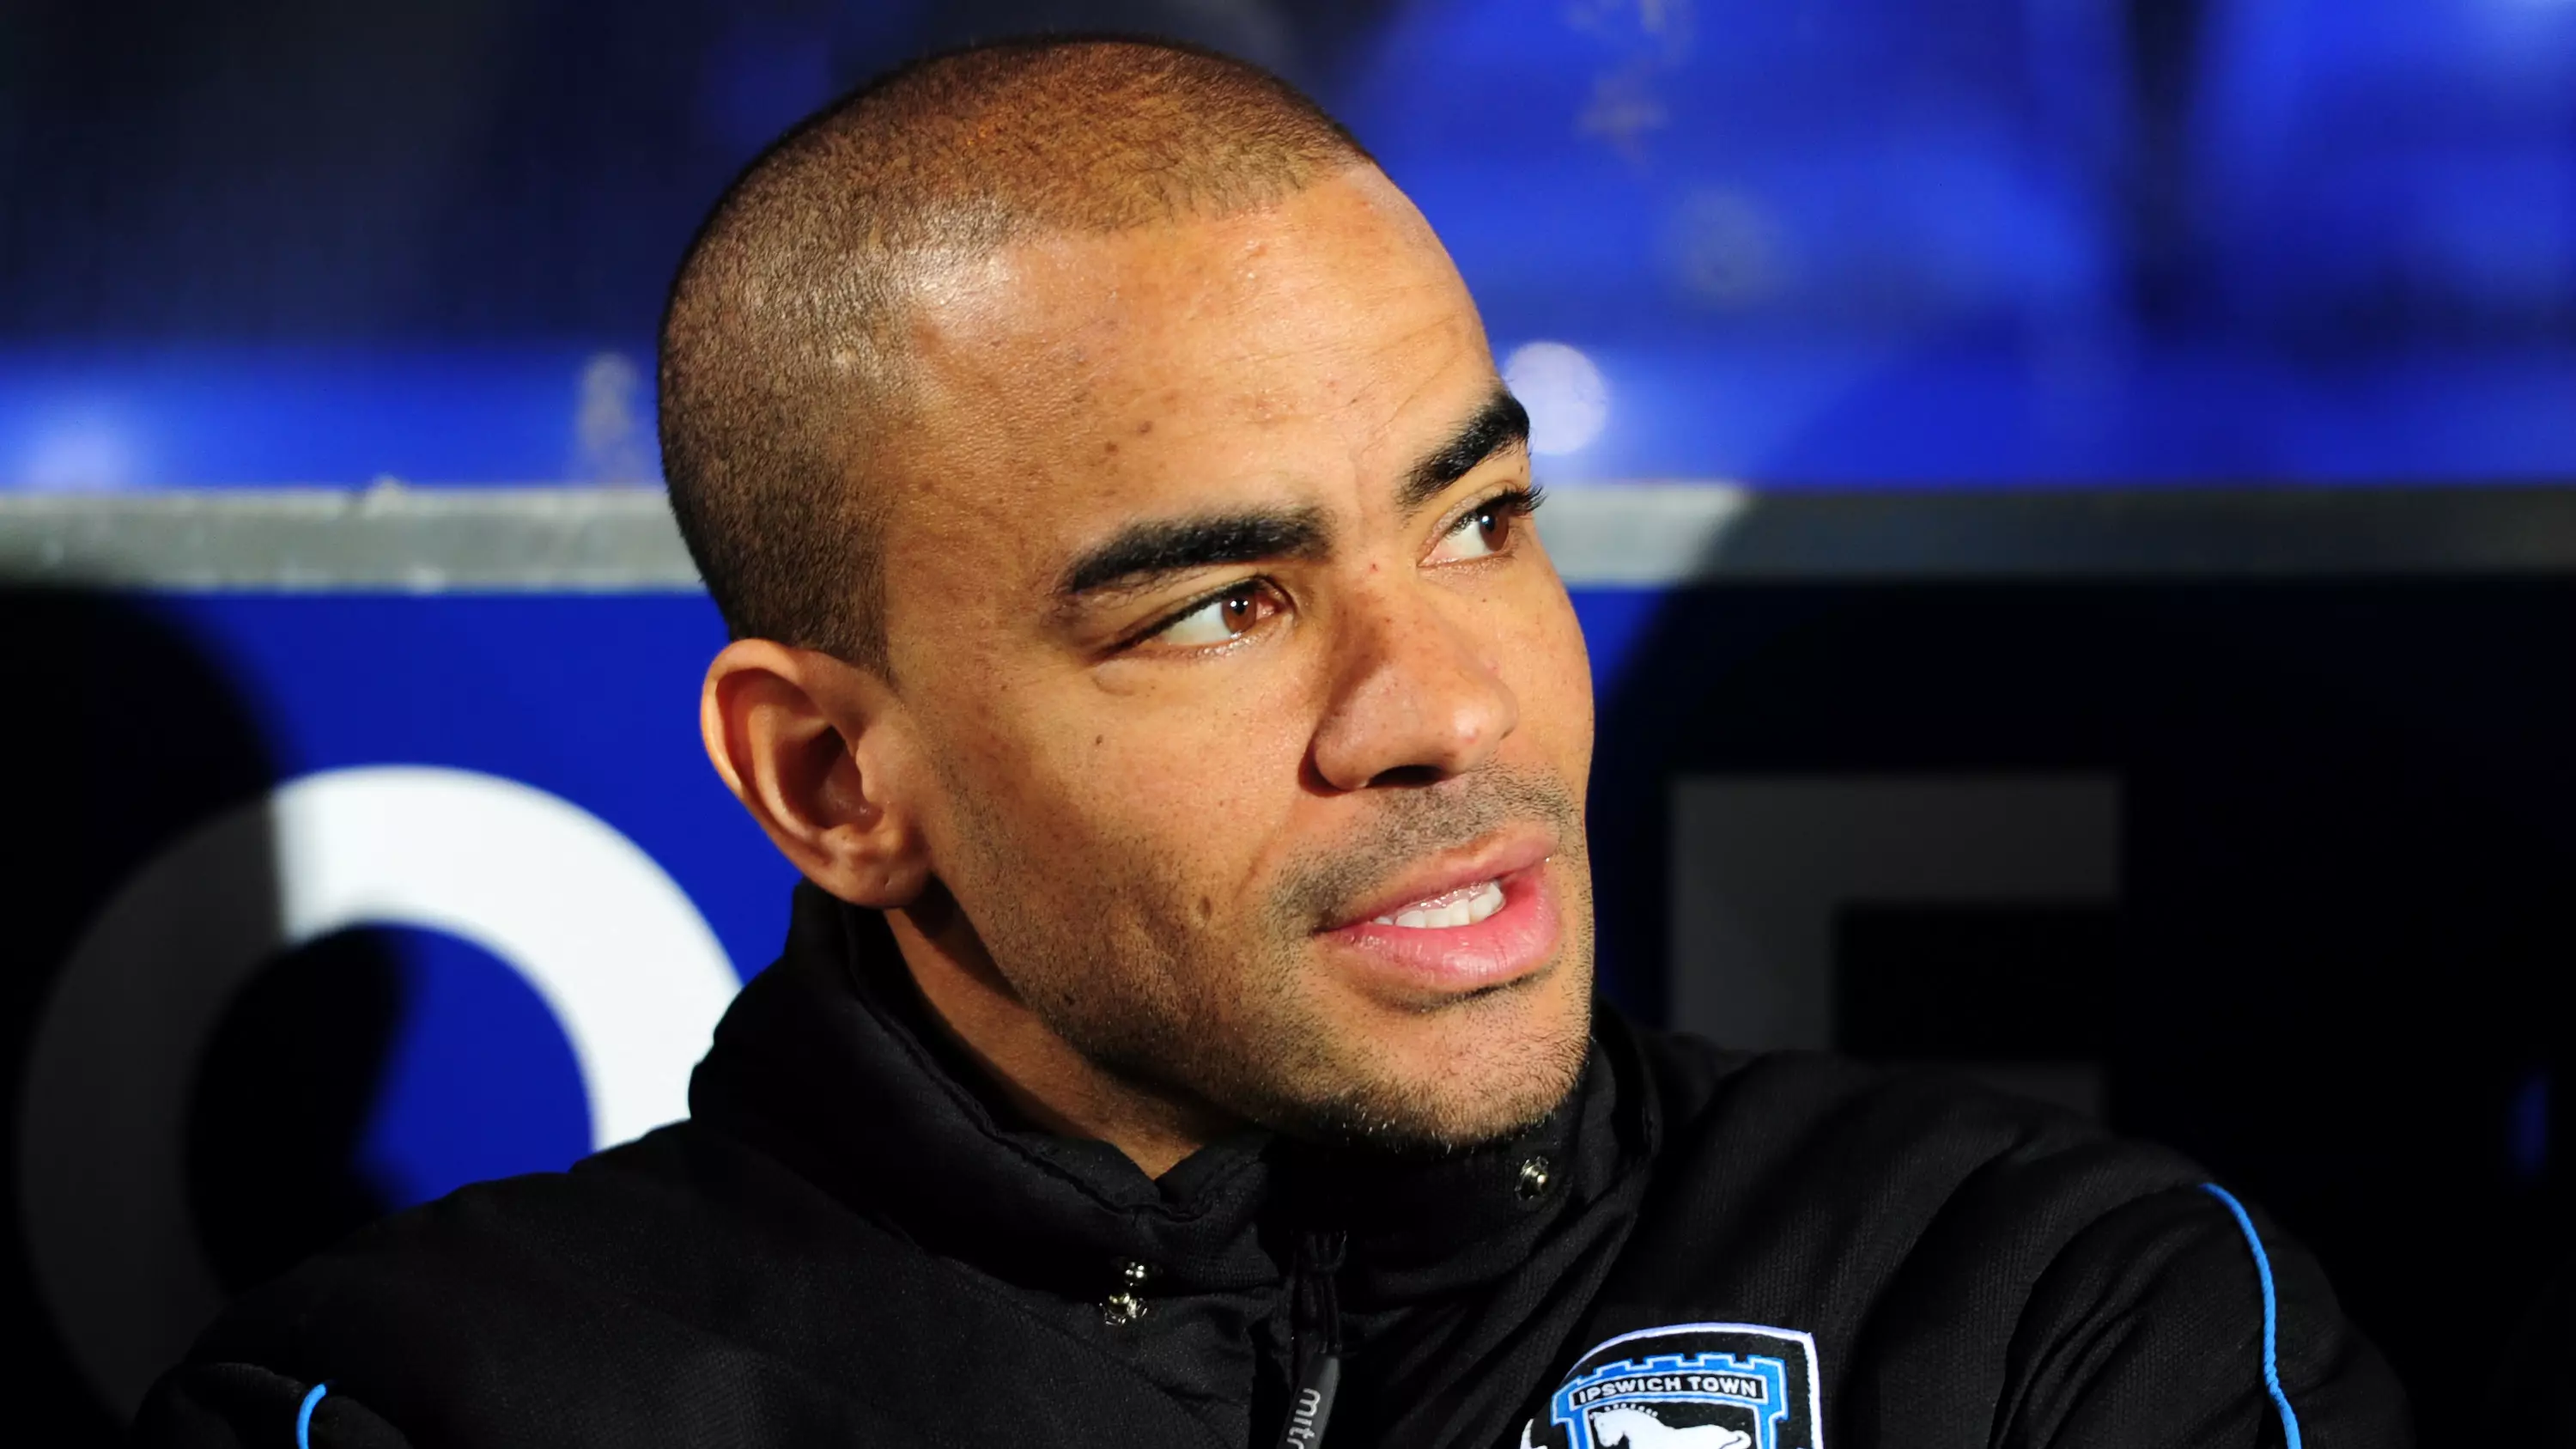 Kieron Dyer Has Spoken About Shocking Sexual Abuse He Suffered At Hands Of A Family Member 